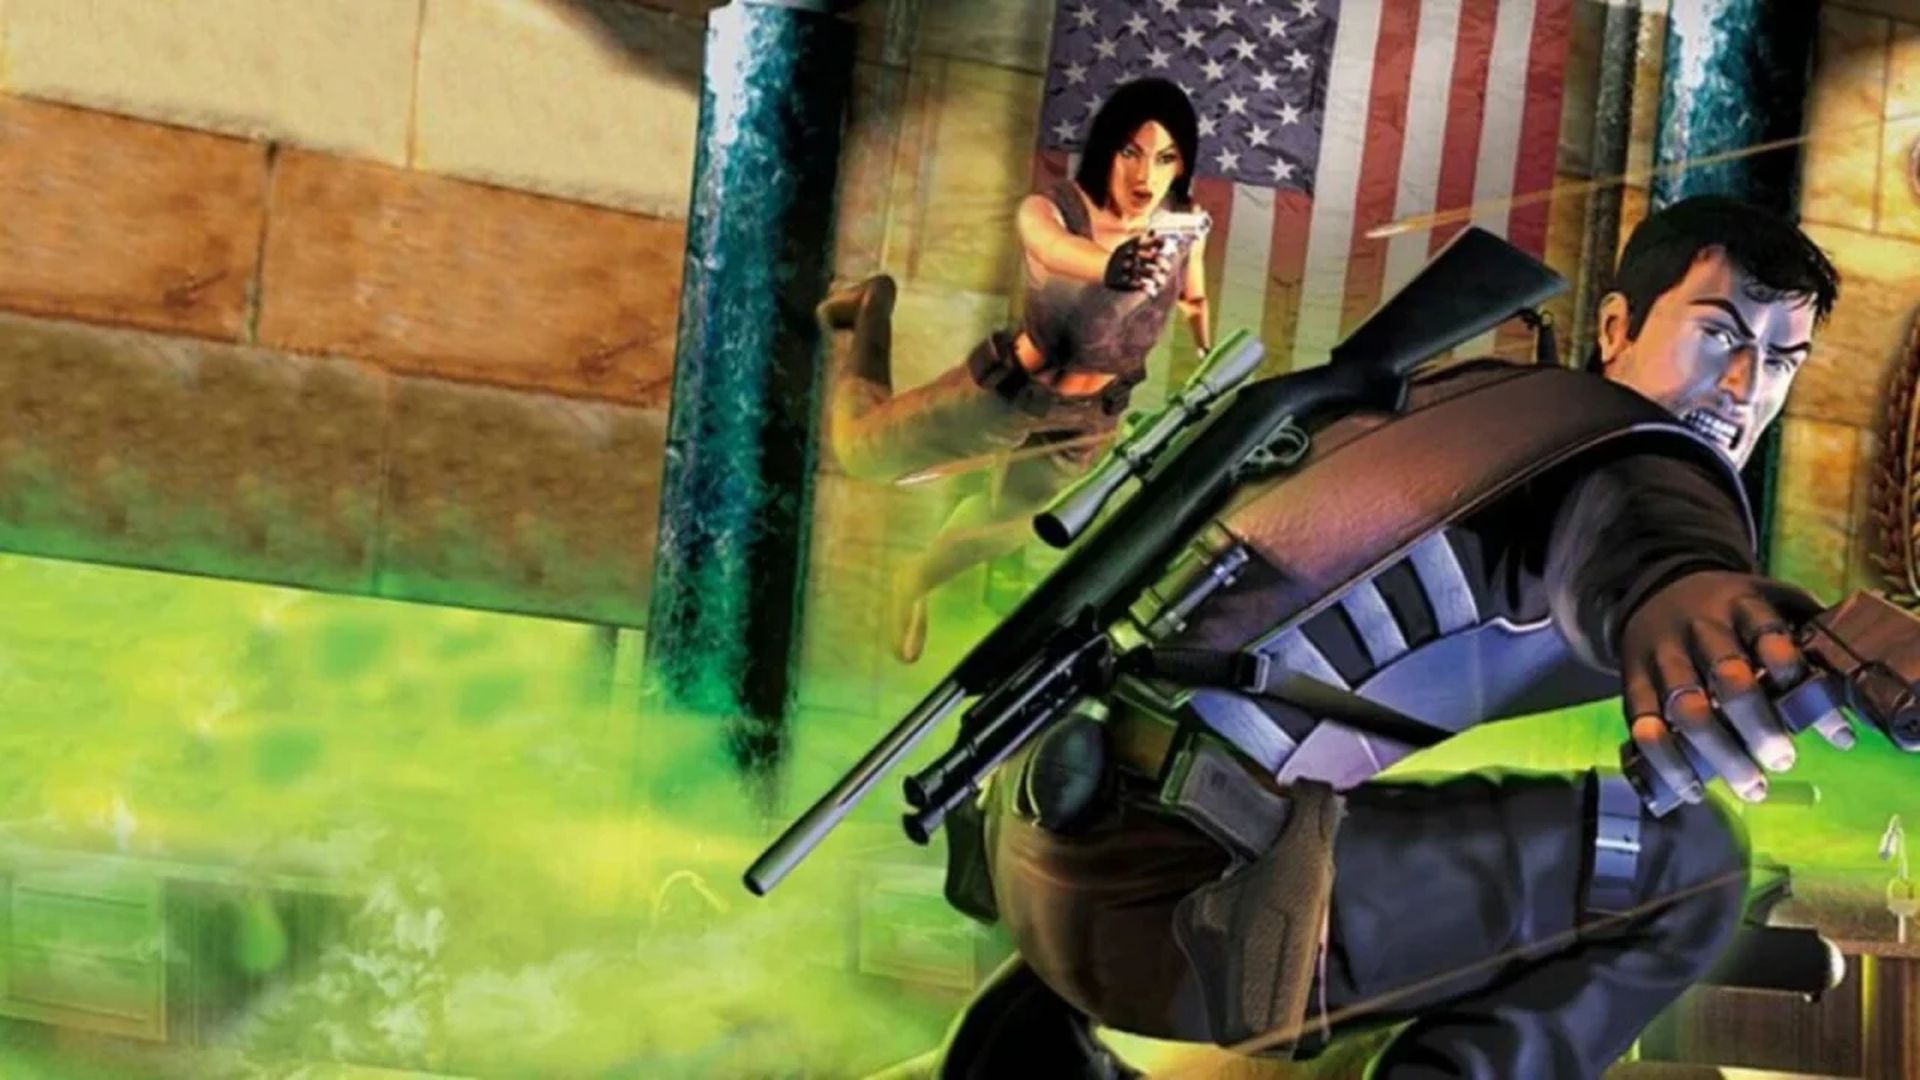 It appears to be the third installment in the Siphon Filter series, as Siphon Filter 3 will join its predecessors as part of the collection of classic games available on PlayStation Plus.  Spotted by Gematsu, the title in question has been rated for release on PS4 and PS5 by the Korea Game Rating and Administration Committee.